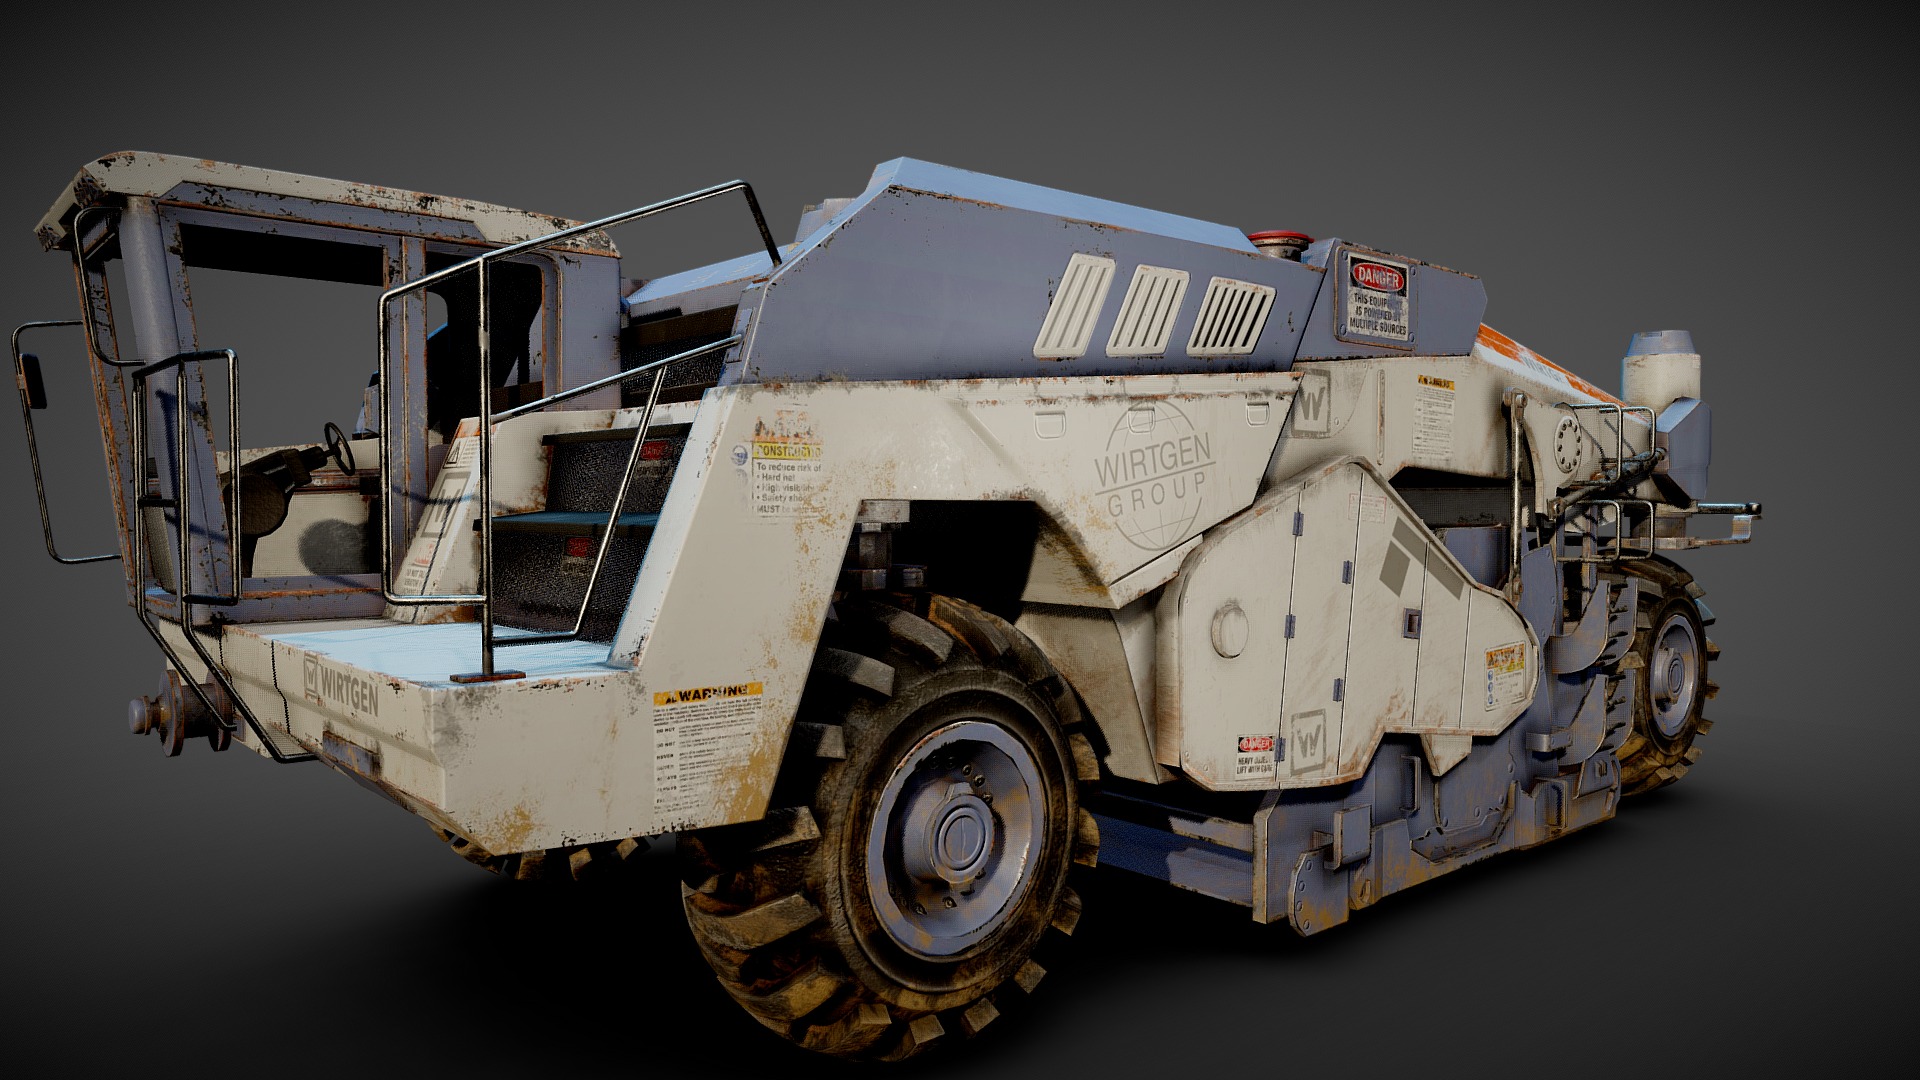 3D model Wirtgen 200 - This is a 3D model of the Wirtgen 200. The 3D model is about a large yellow and white tractor.